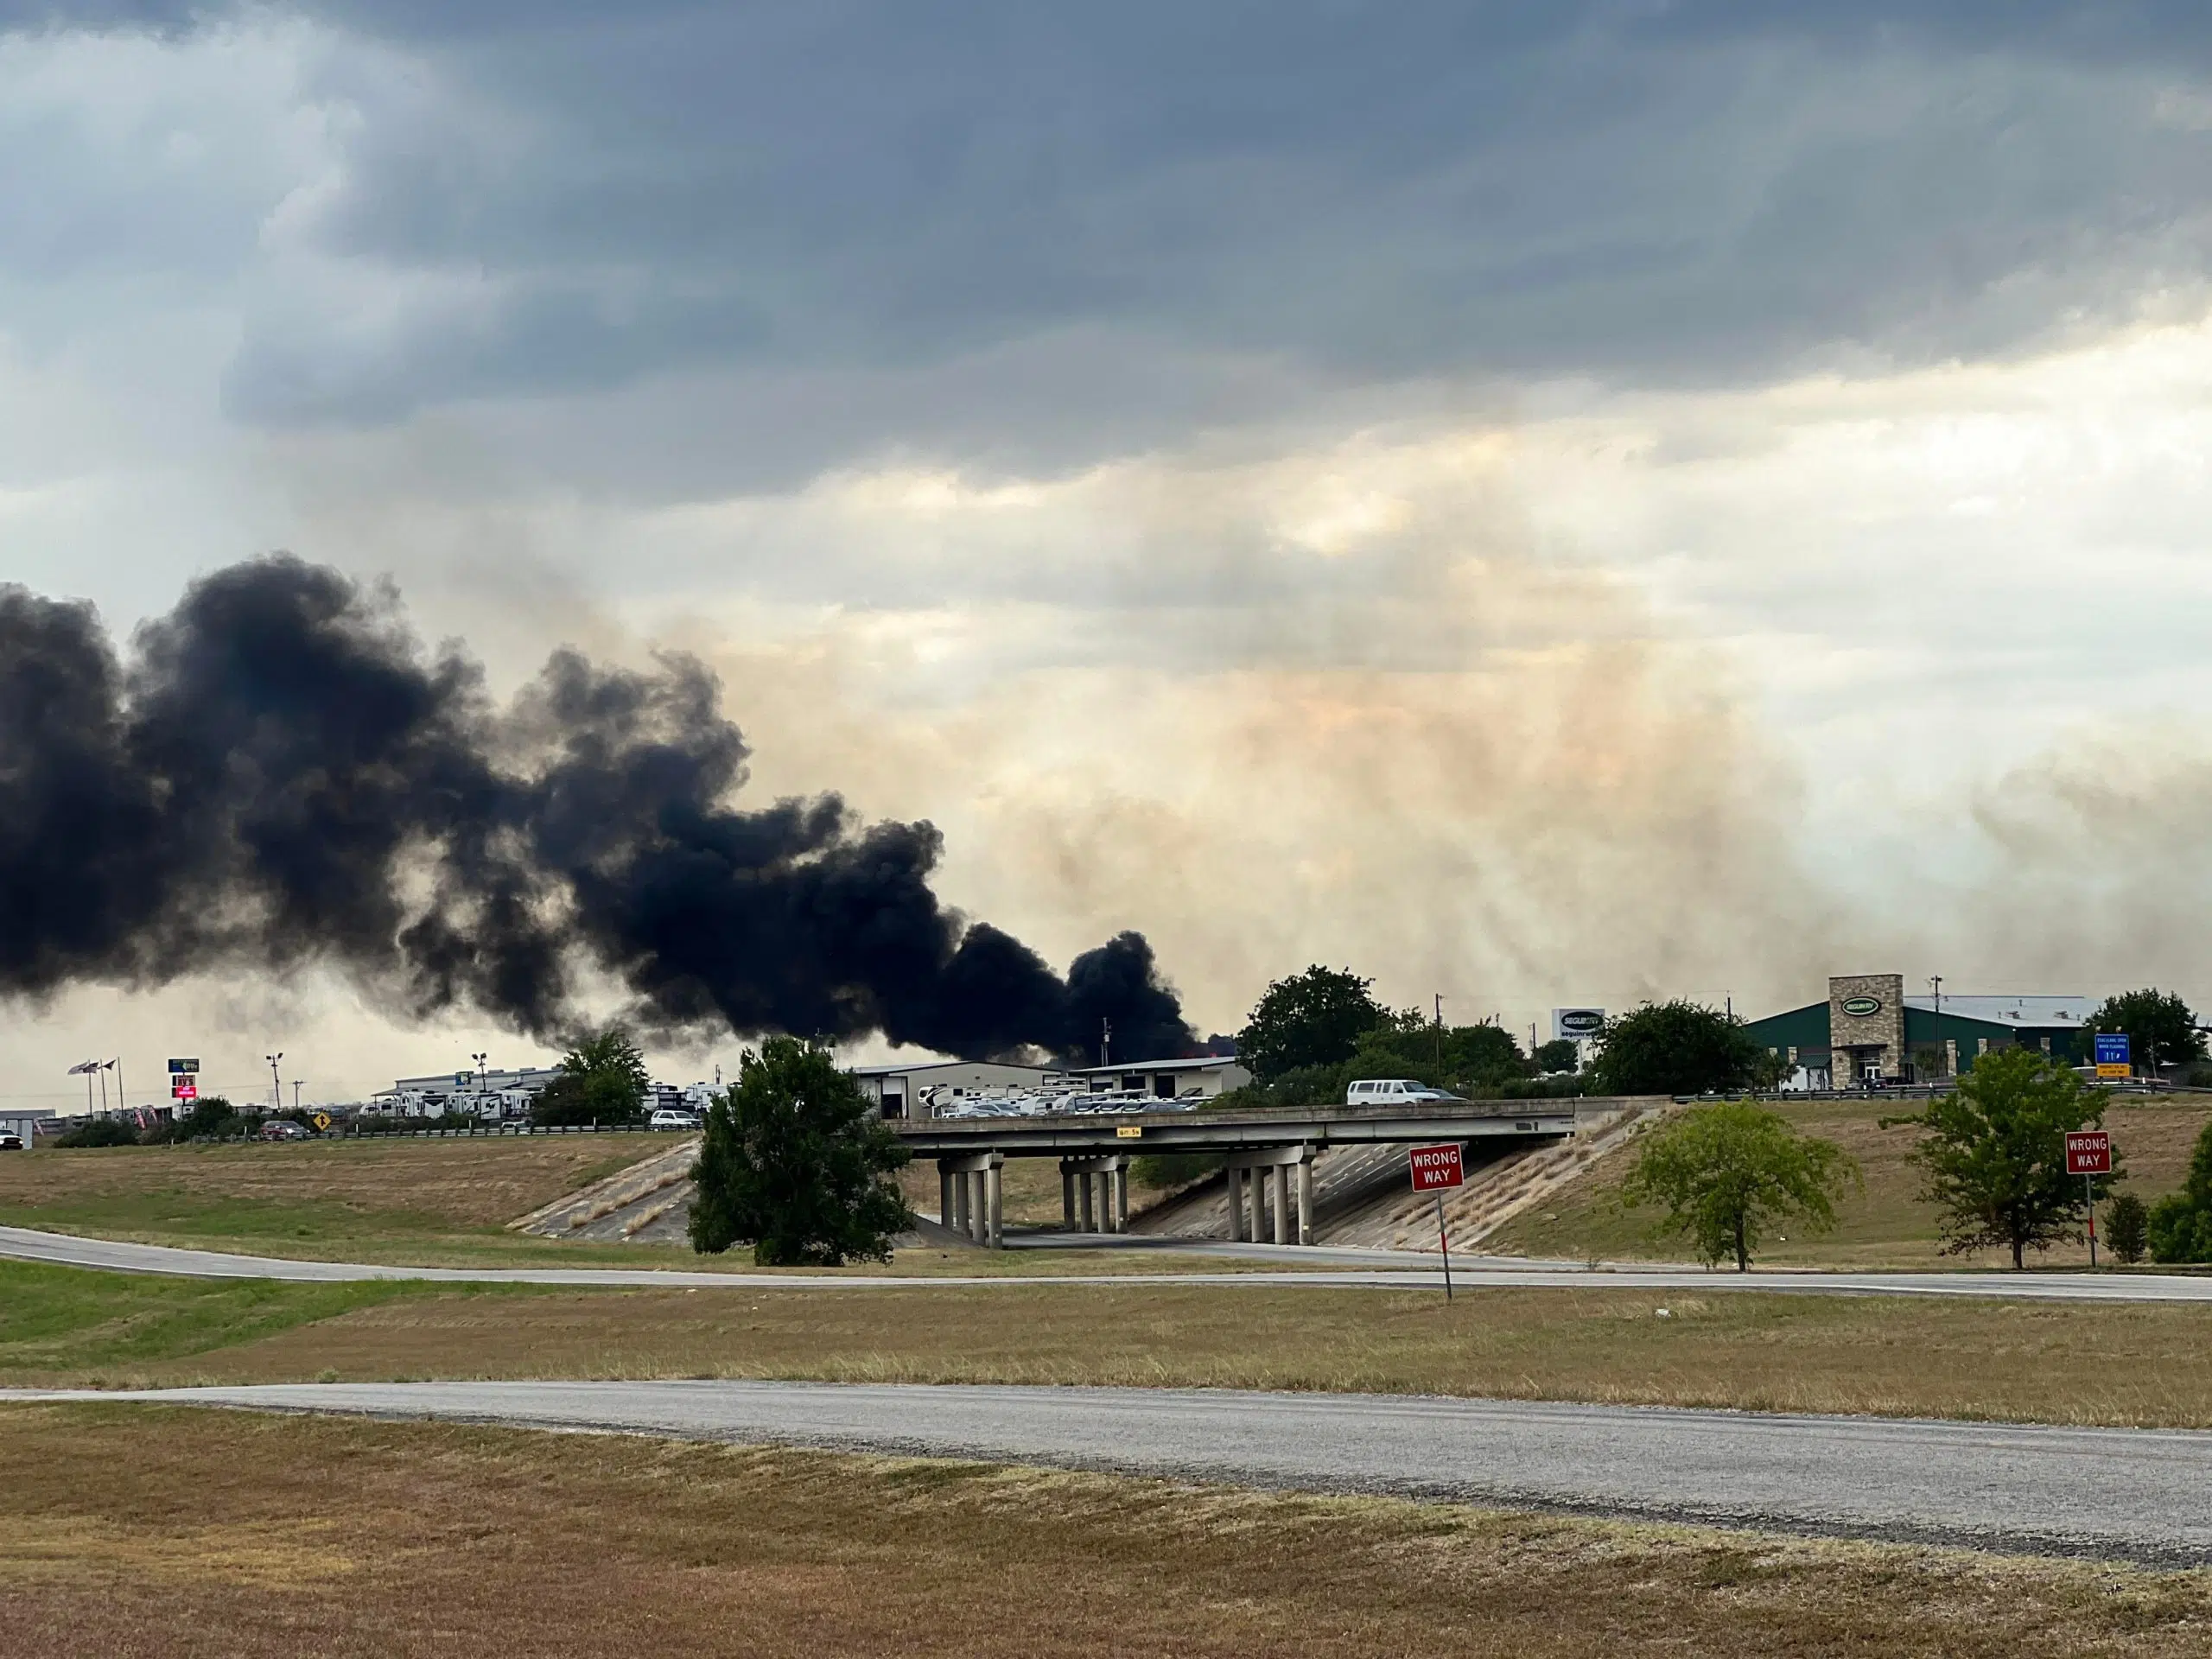 Lightning strikes causes fire on IH-10 West